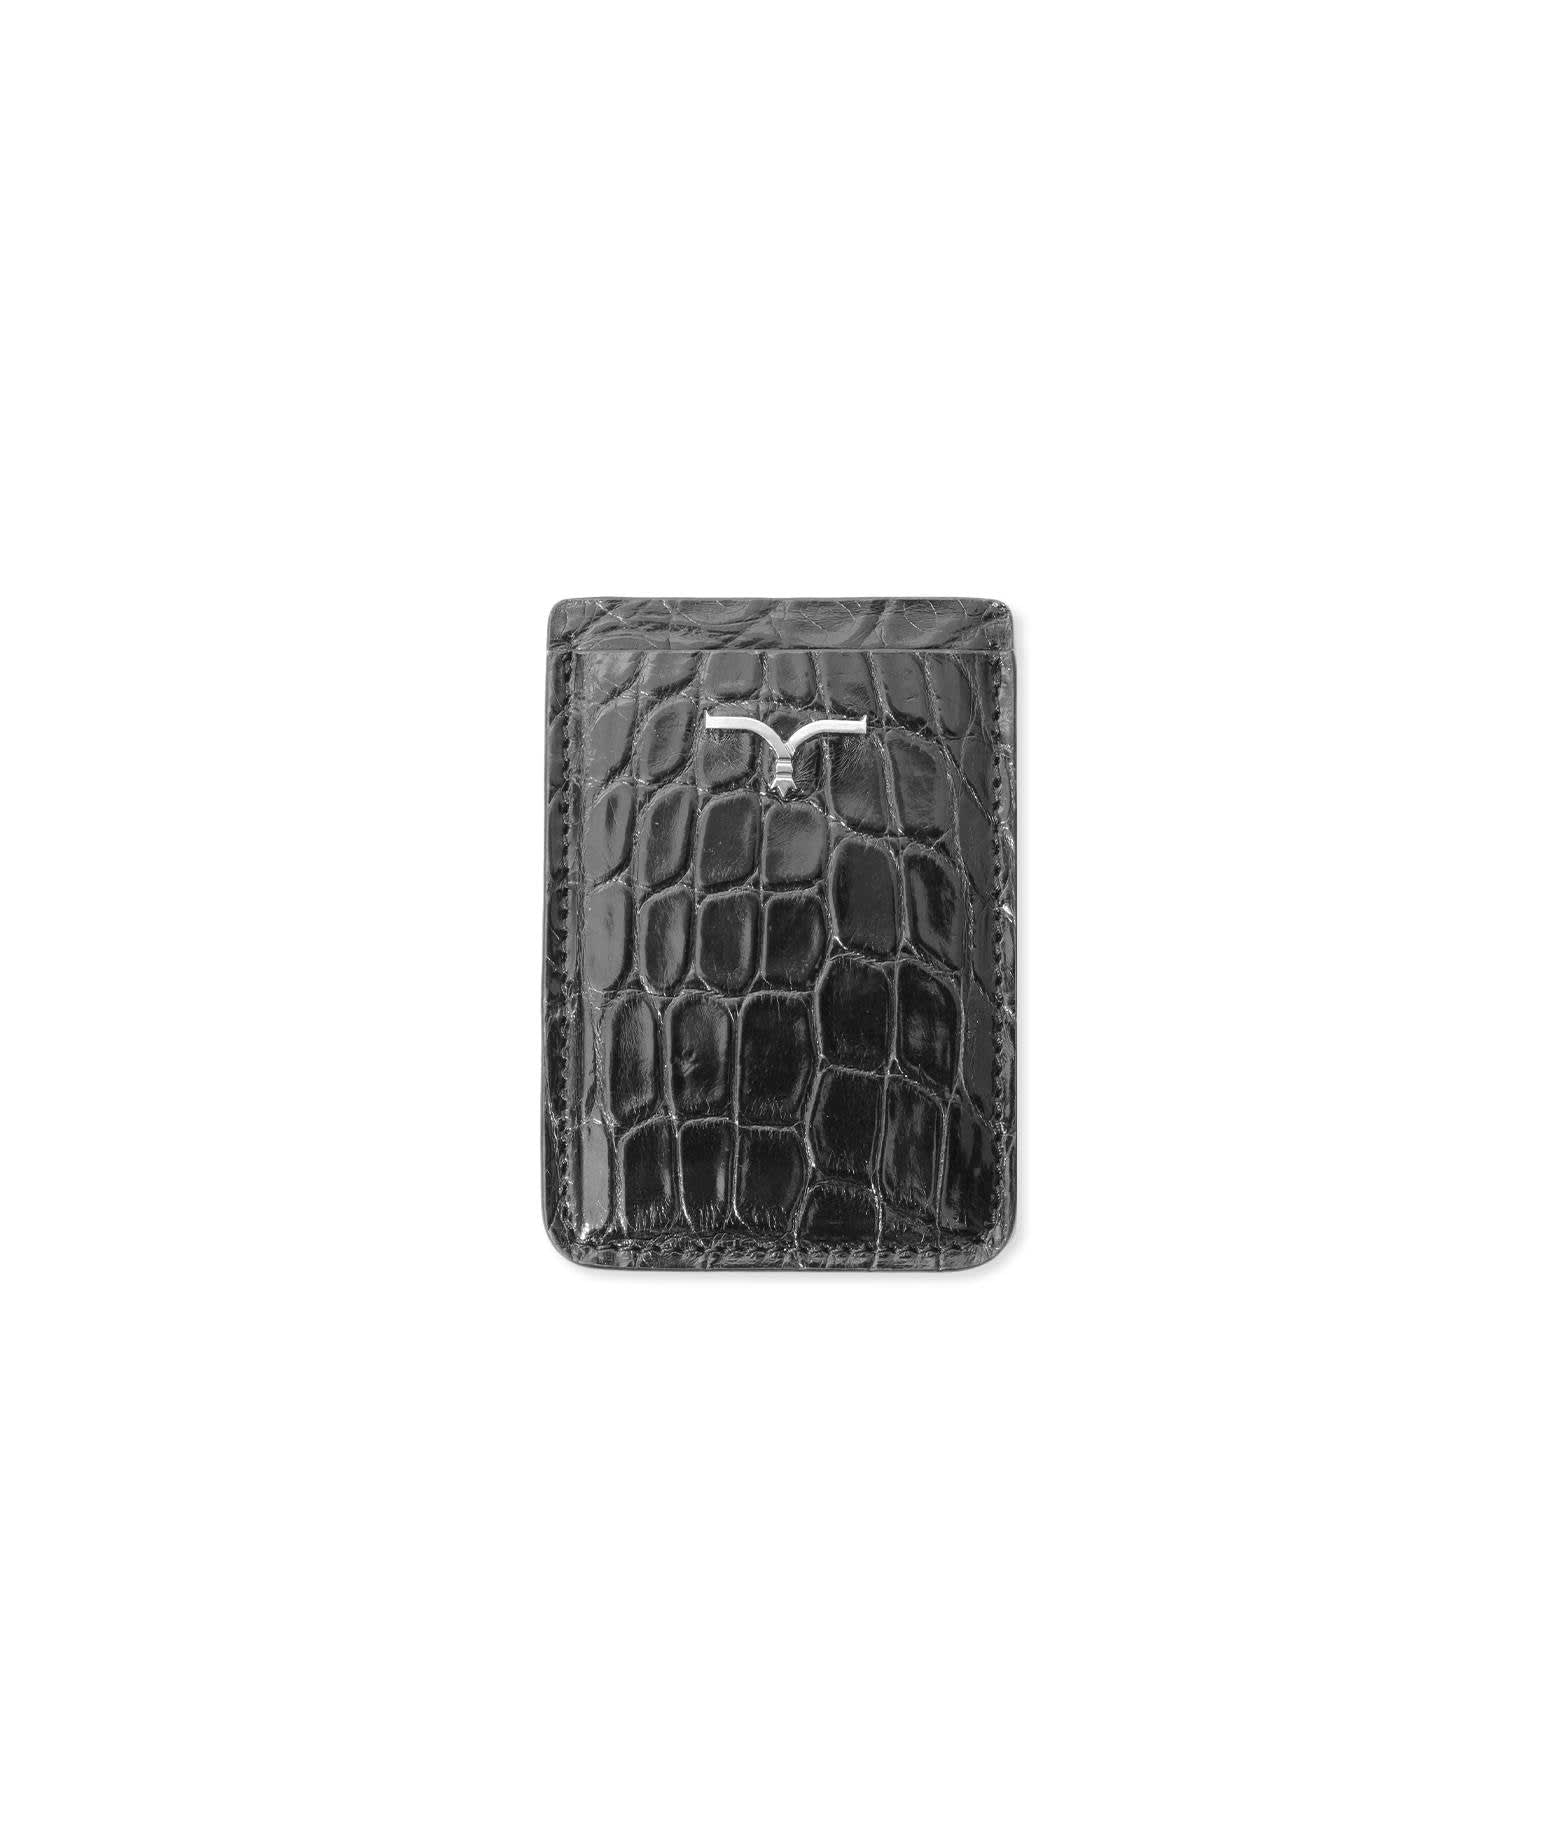 Larusmiani Magnetic Credit Card Holder Accessory In Black